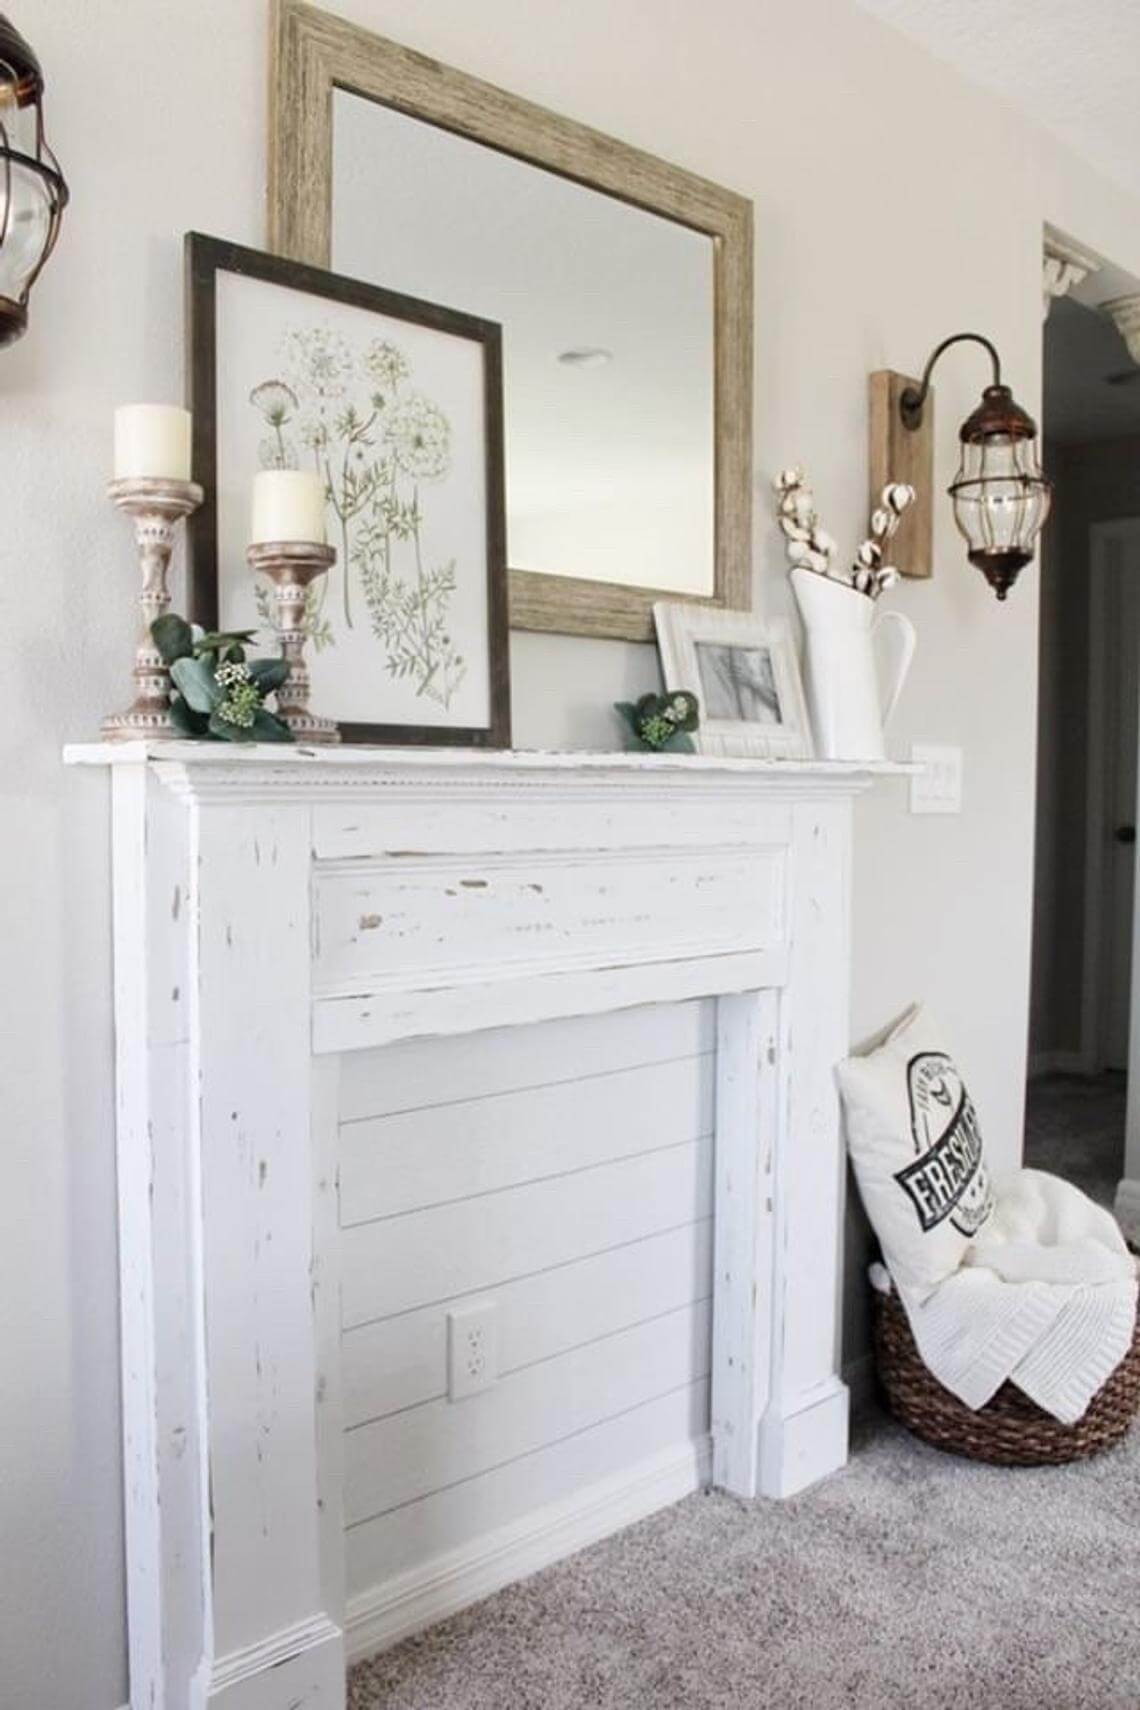 Decorative and Dreamy White Hearth with Shiplap